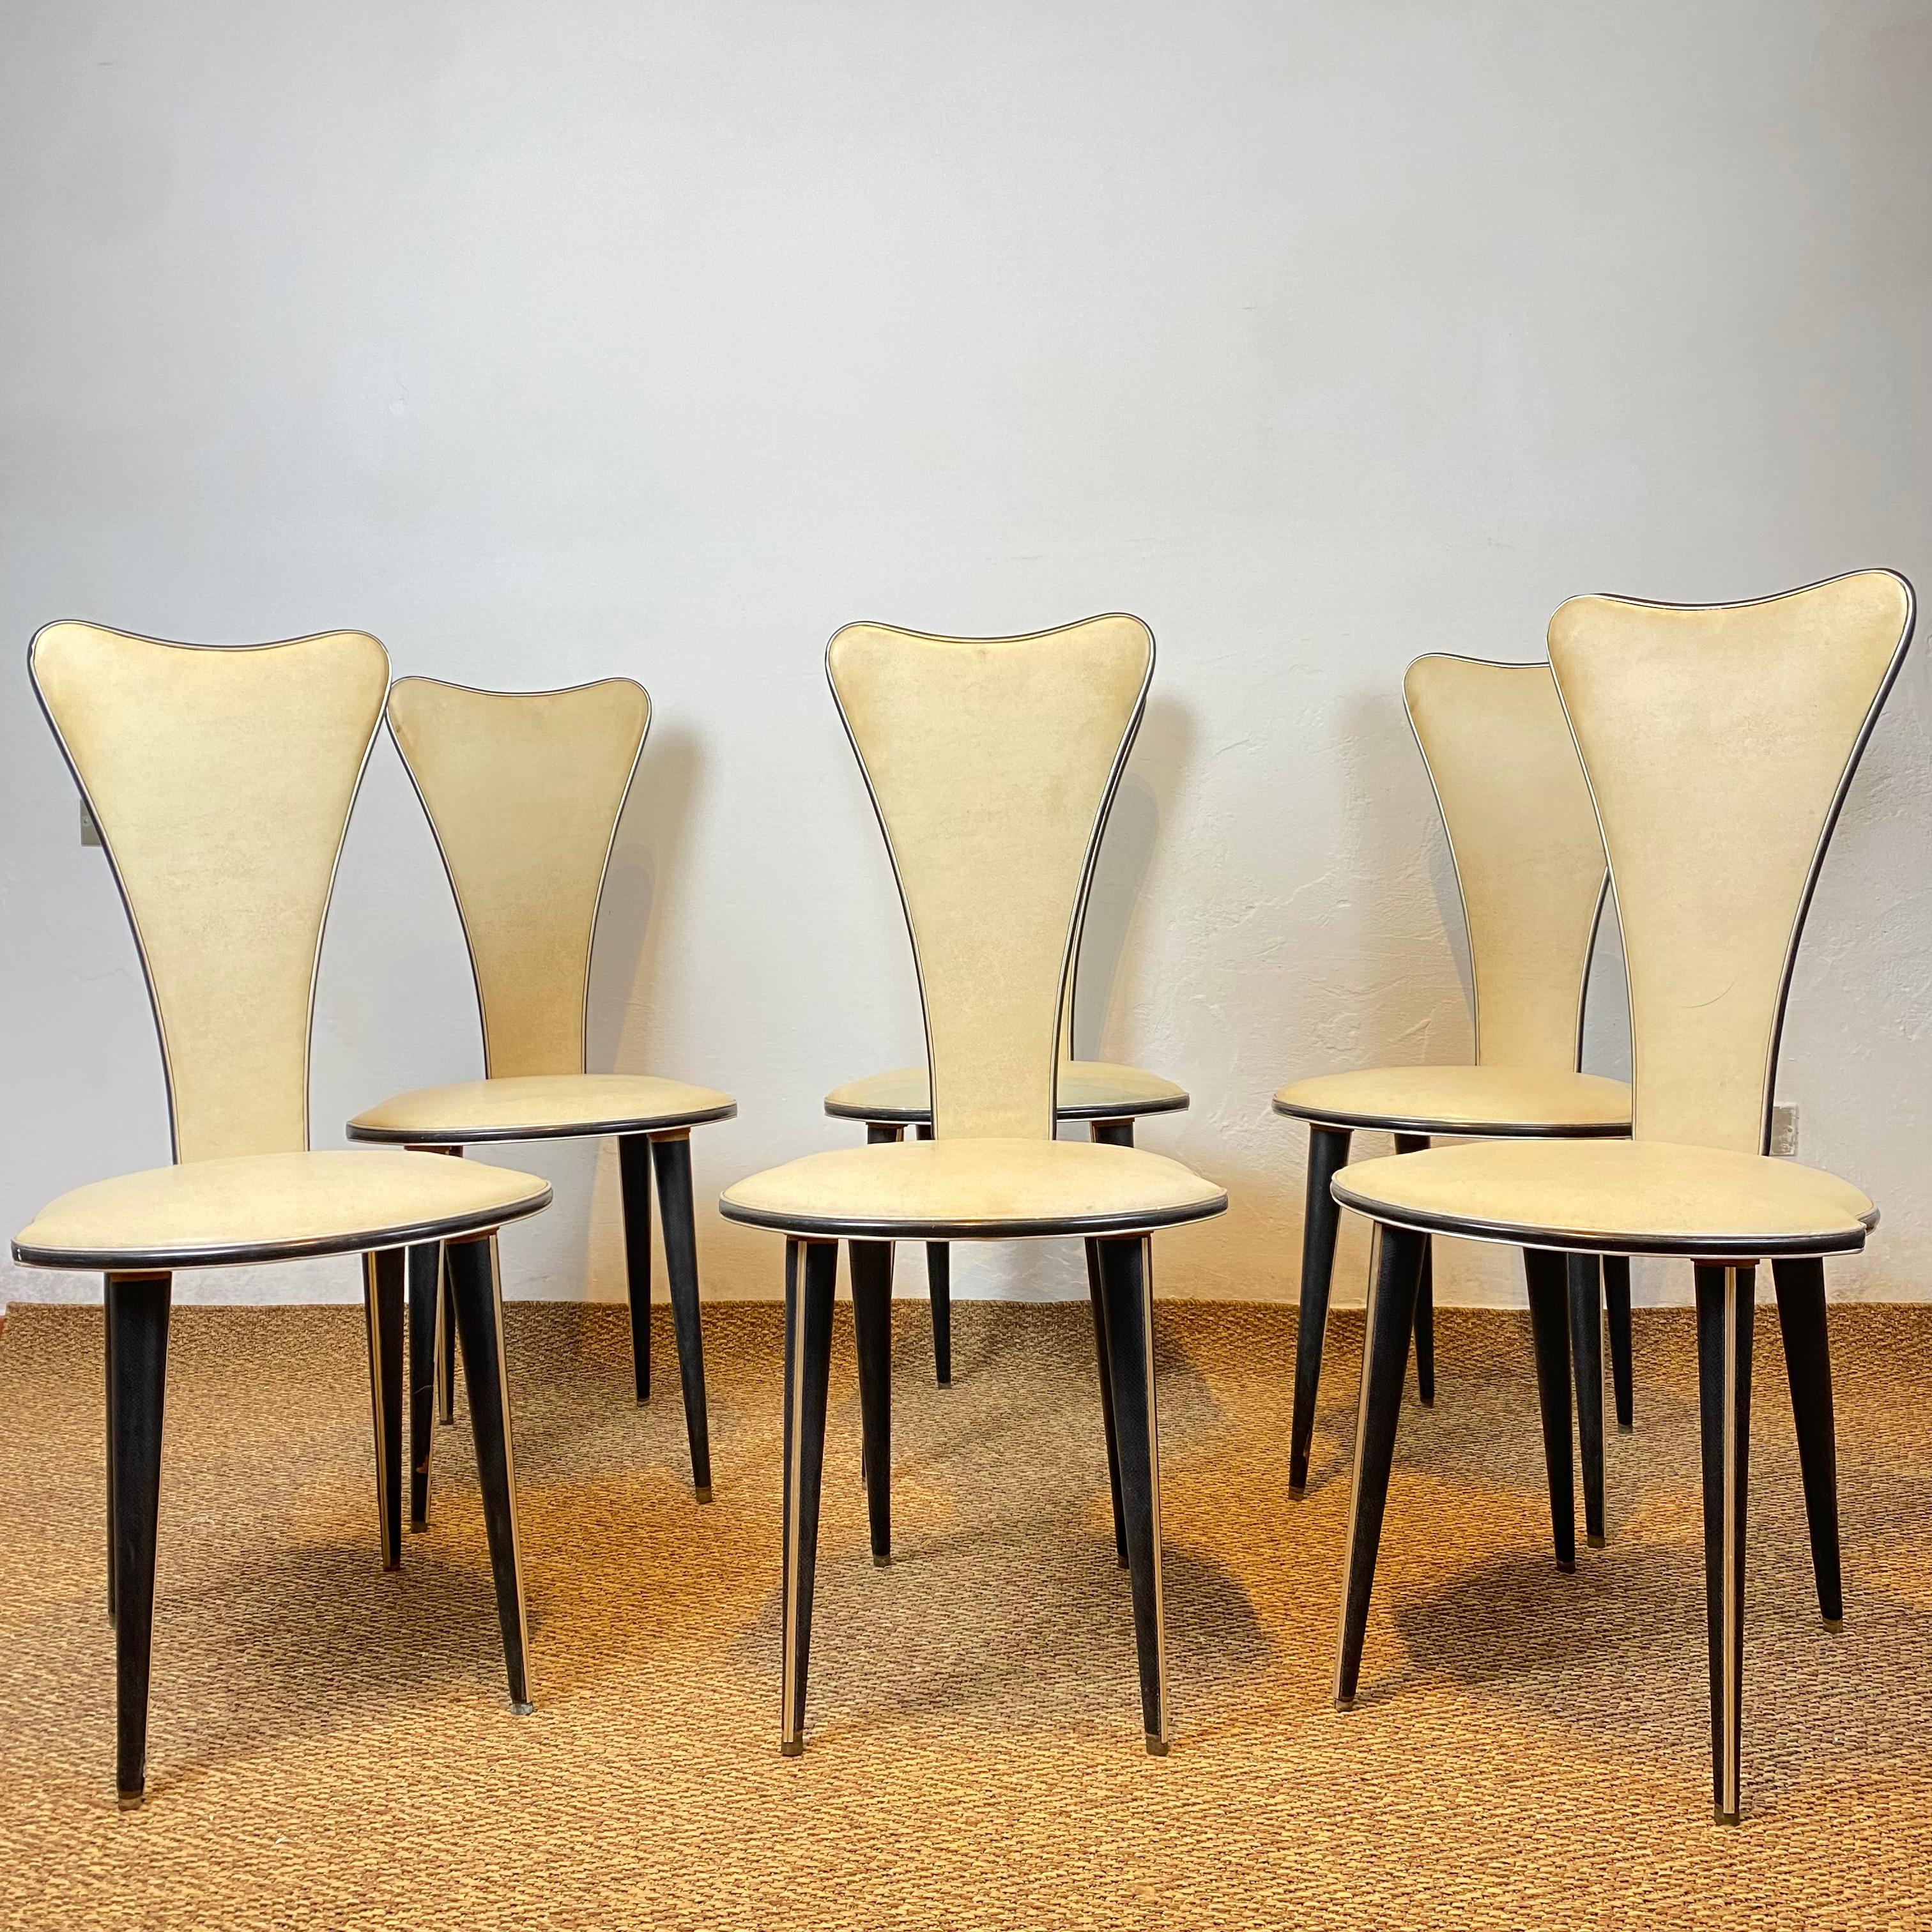 Six dining chairs designed by Umberto Mascagni of Bologna in the 1950s. The main body frame is solid European wood, covered in cream-colored grained vinyl and anodized aluminum. The legs are also covered in black vinyl. Slight signs of aging as